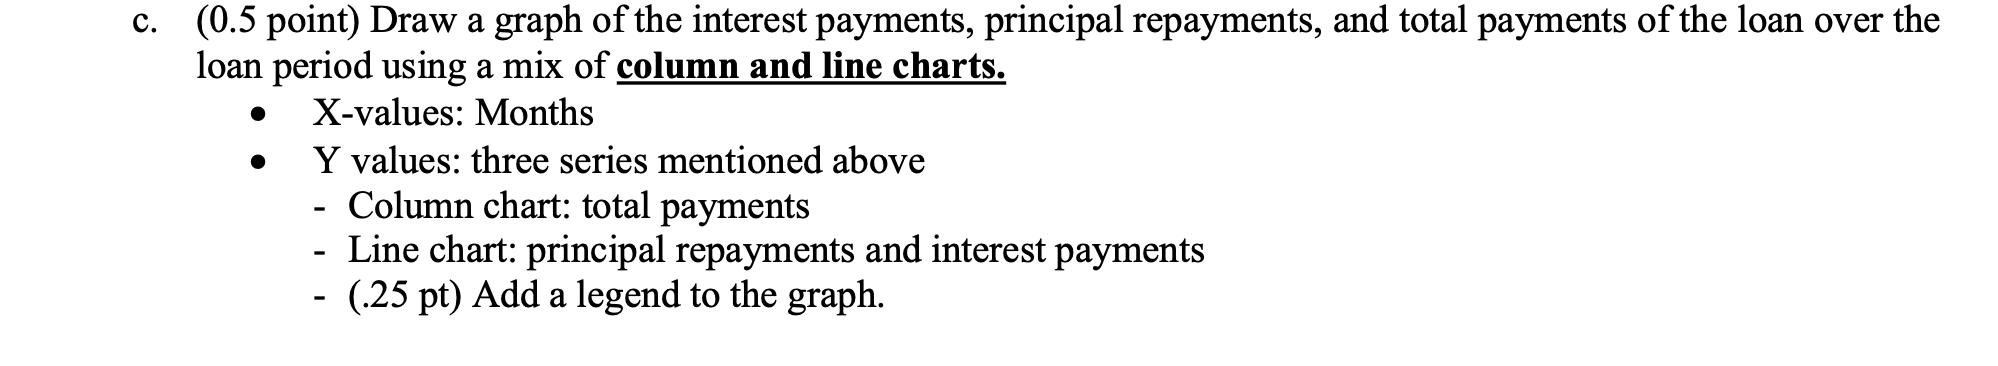 c. (0.5 point) Draw a graph of the interest payments, principal repayments, and total payments of the loan over the loan peri